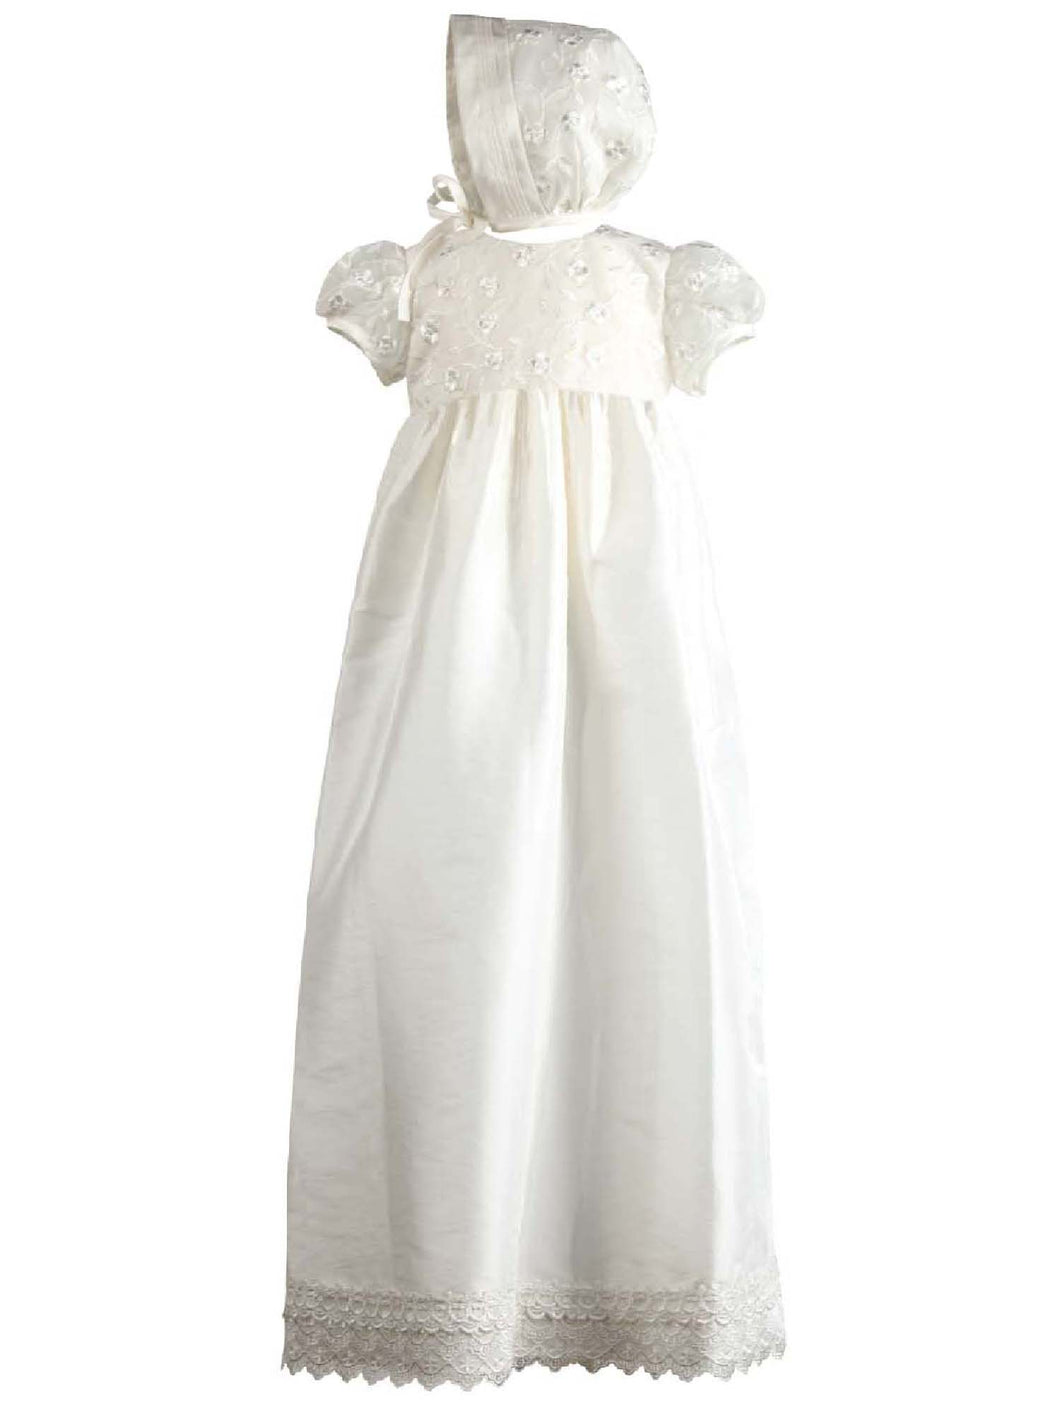 Nessa - Traditional Lace Bodice Christening Robe with Matching Bonnet